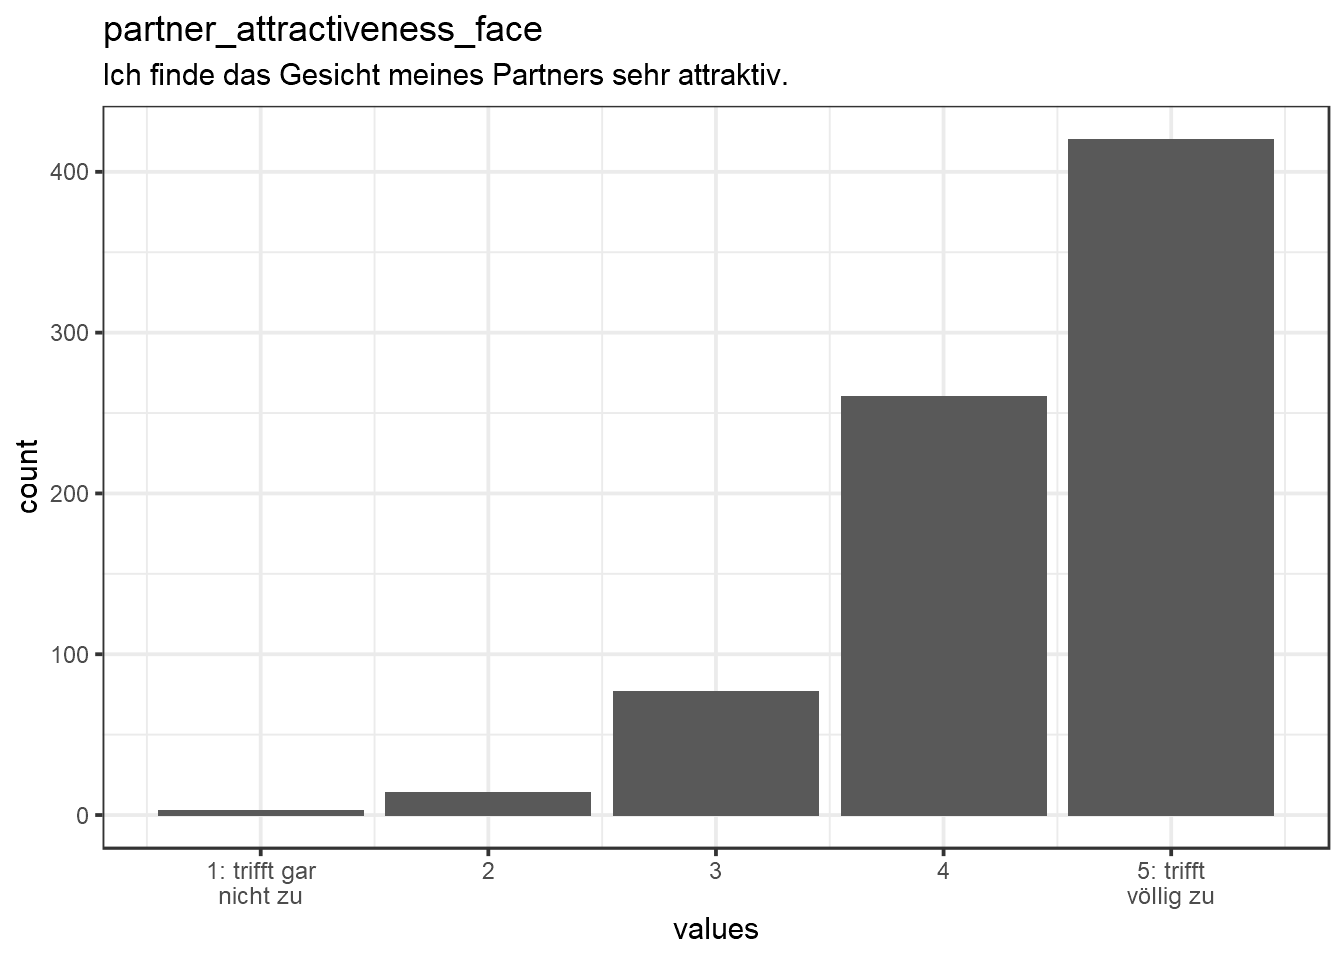 Distribution of values for partner_attractiveness_face